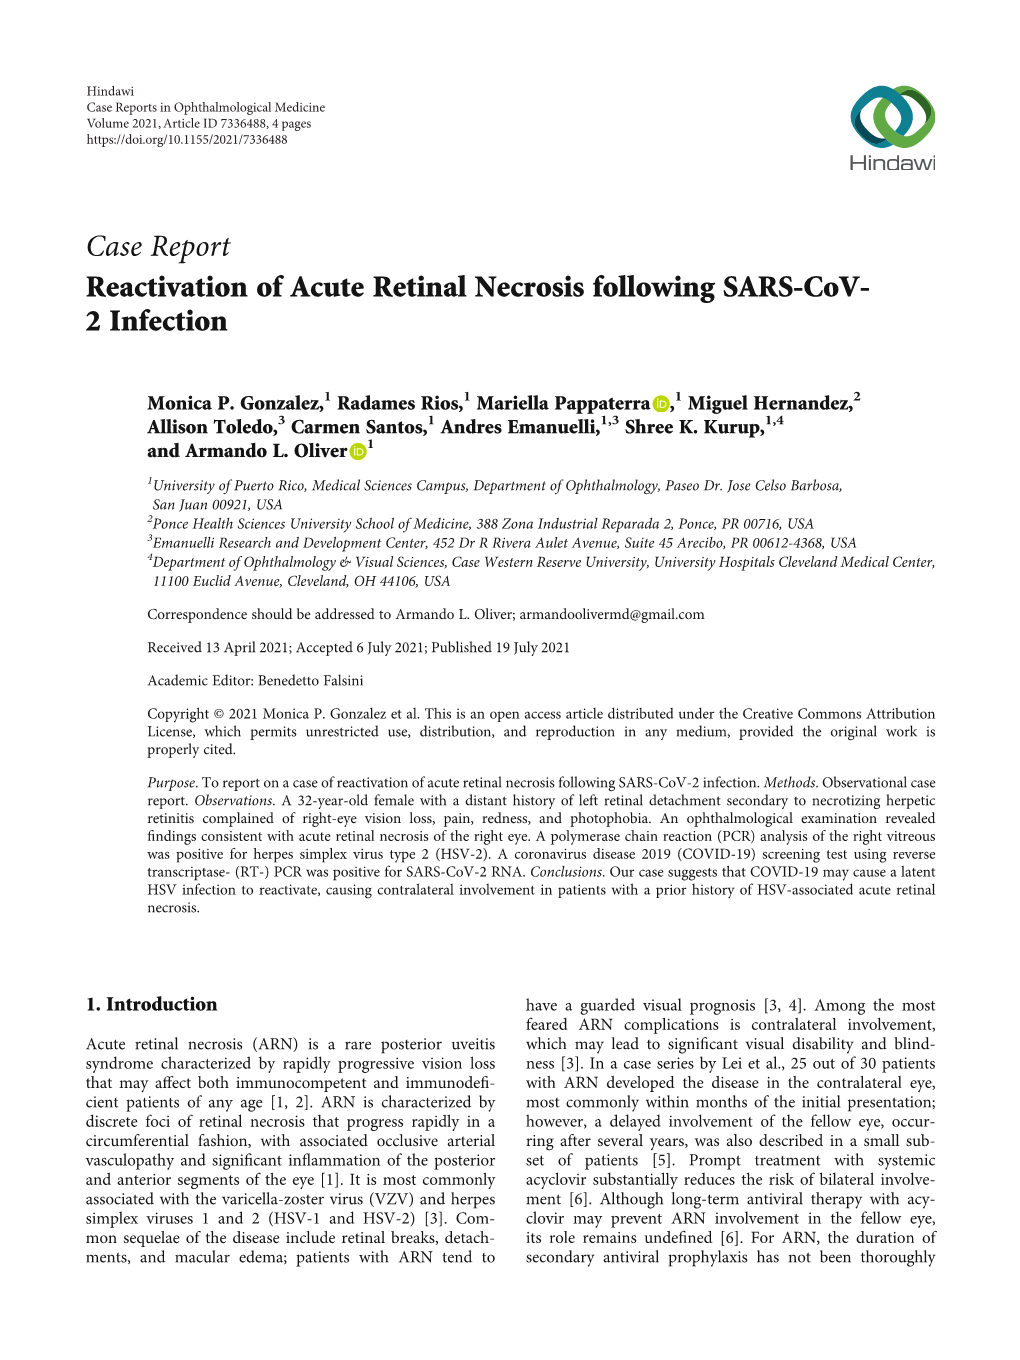 Reactivation of Acute Retinal Necrosis Following SARS-Cov-2 Infection